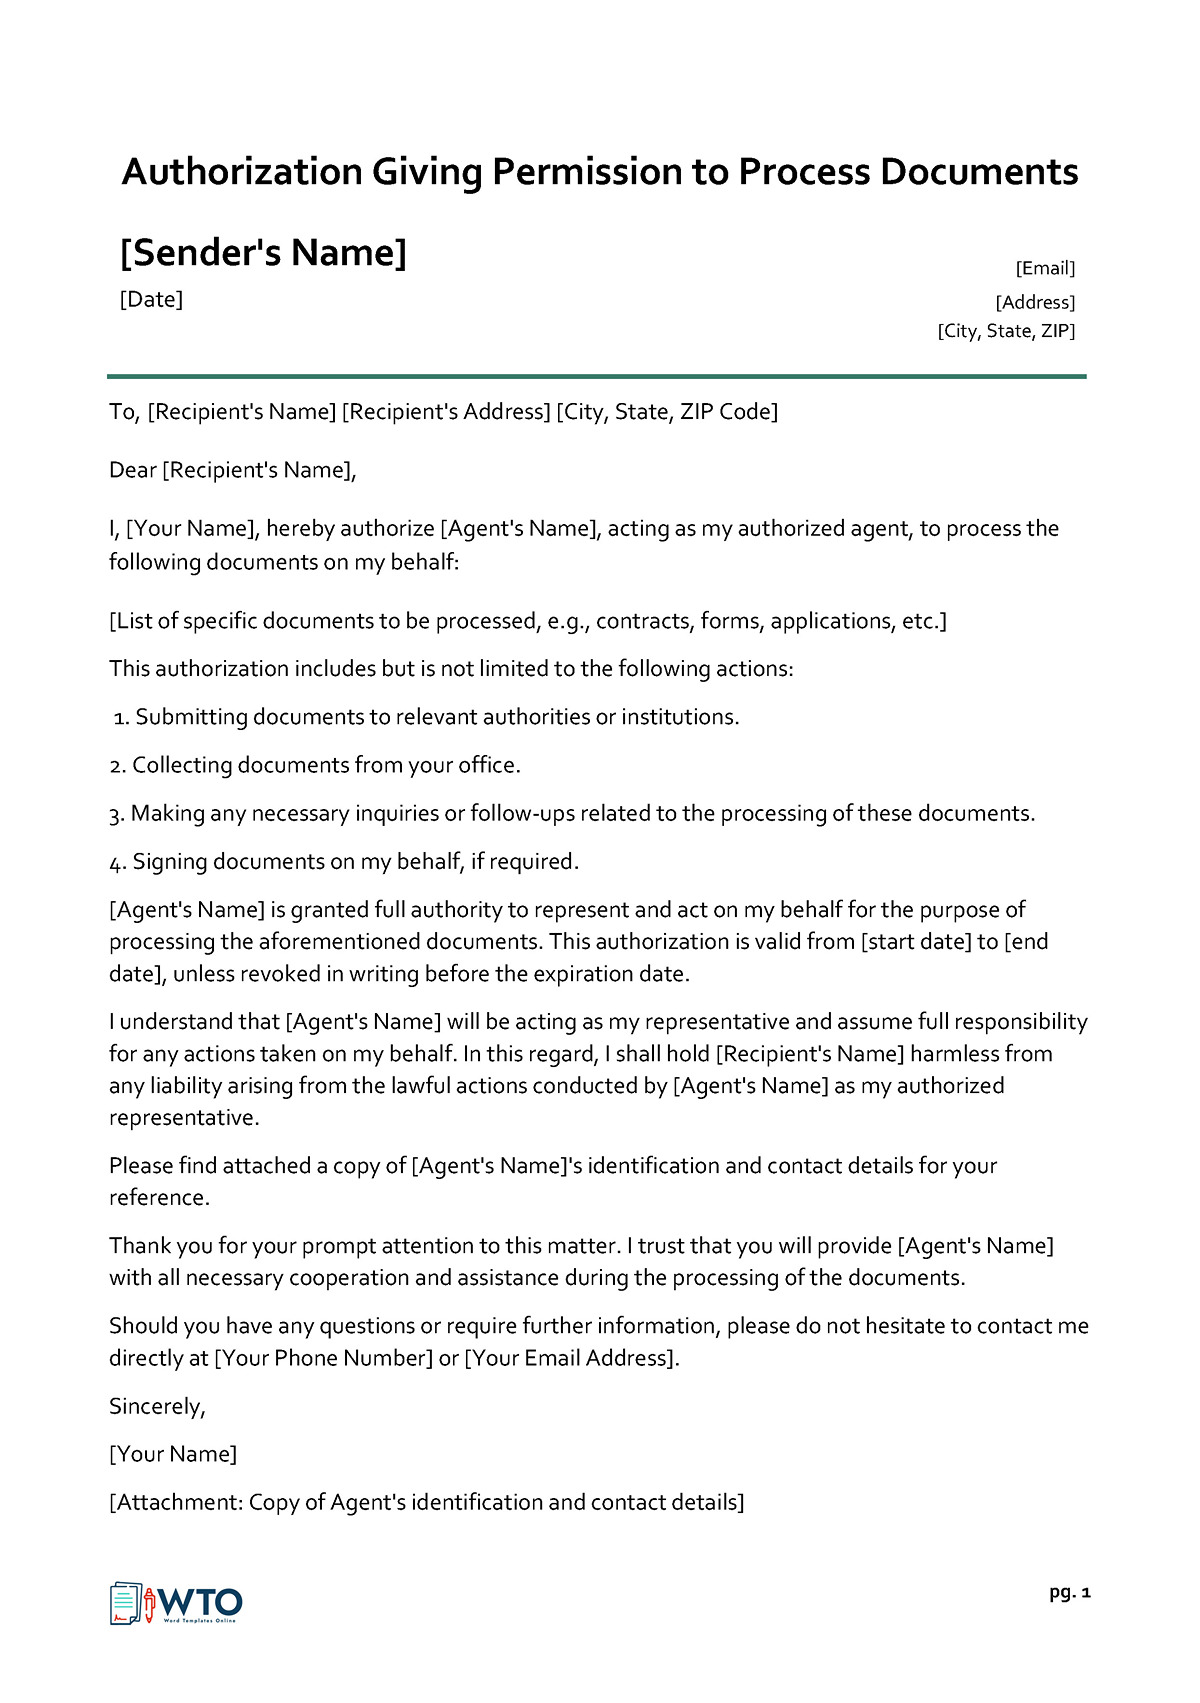 Document Processing Consent Letter free download